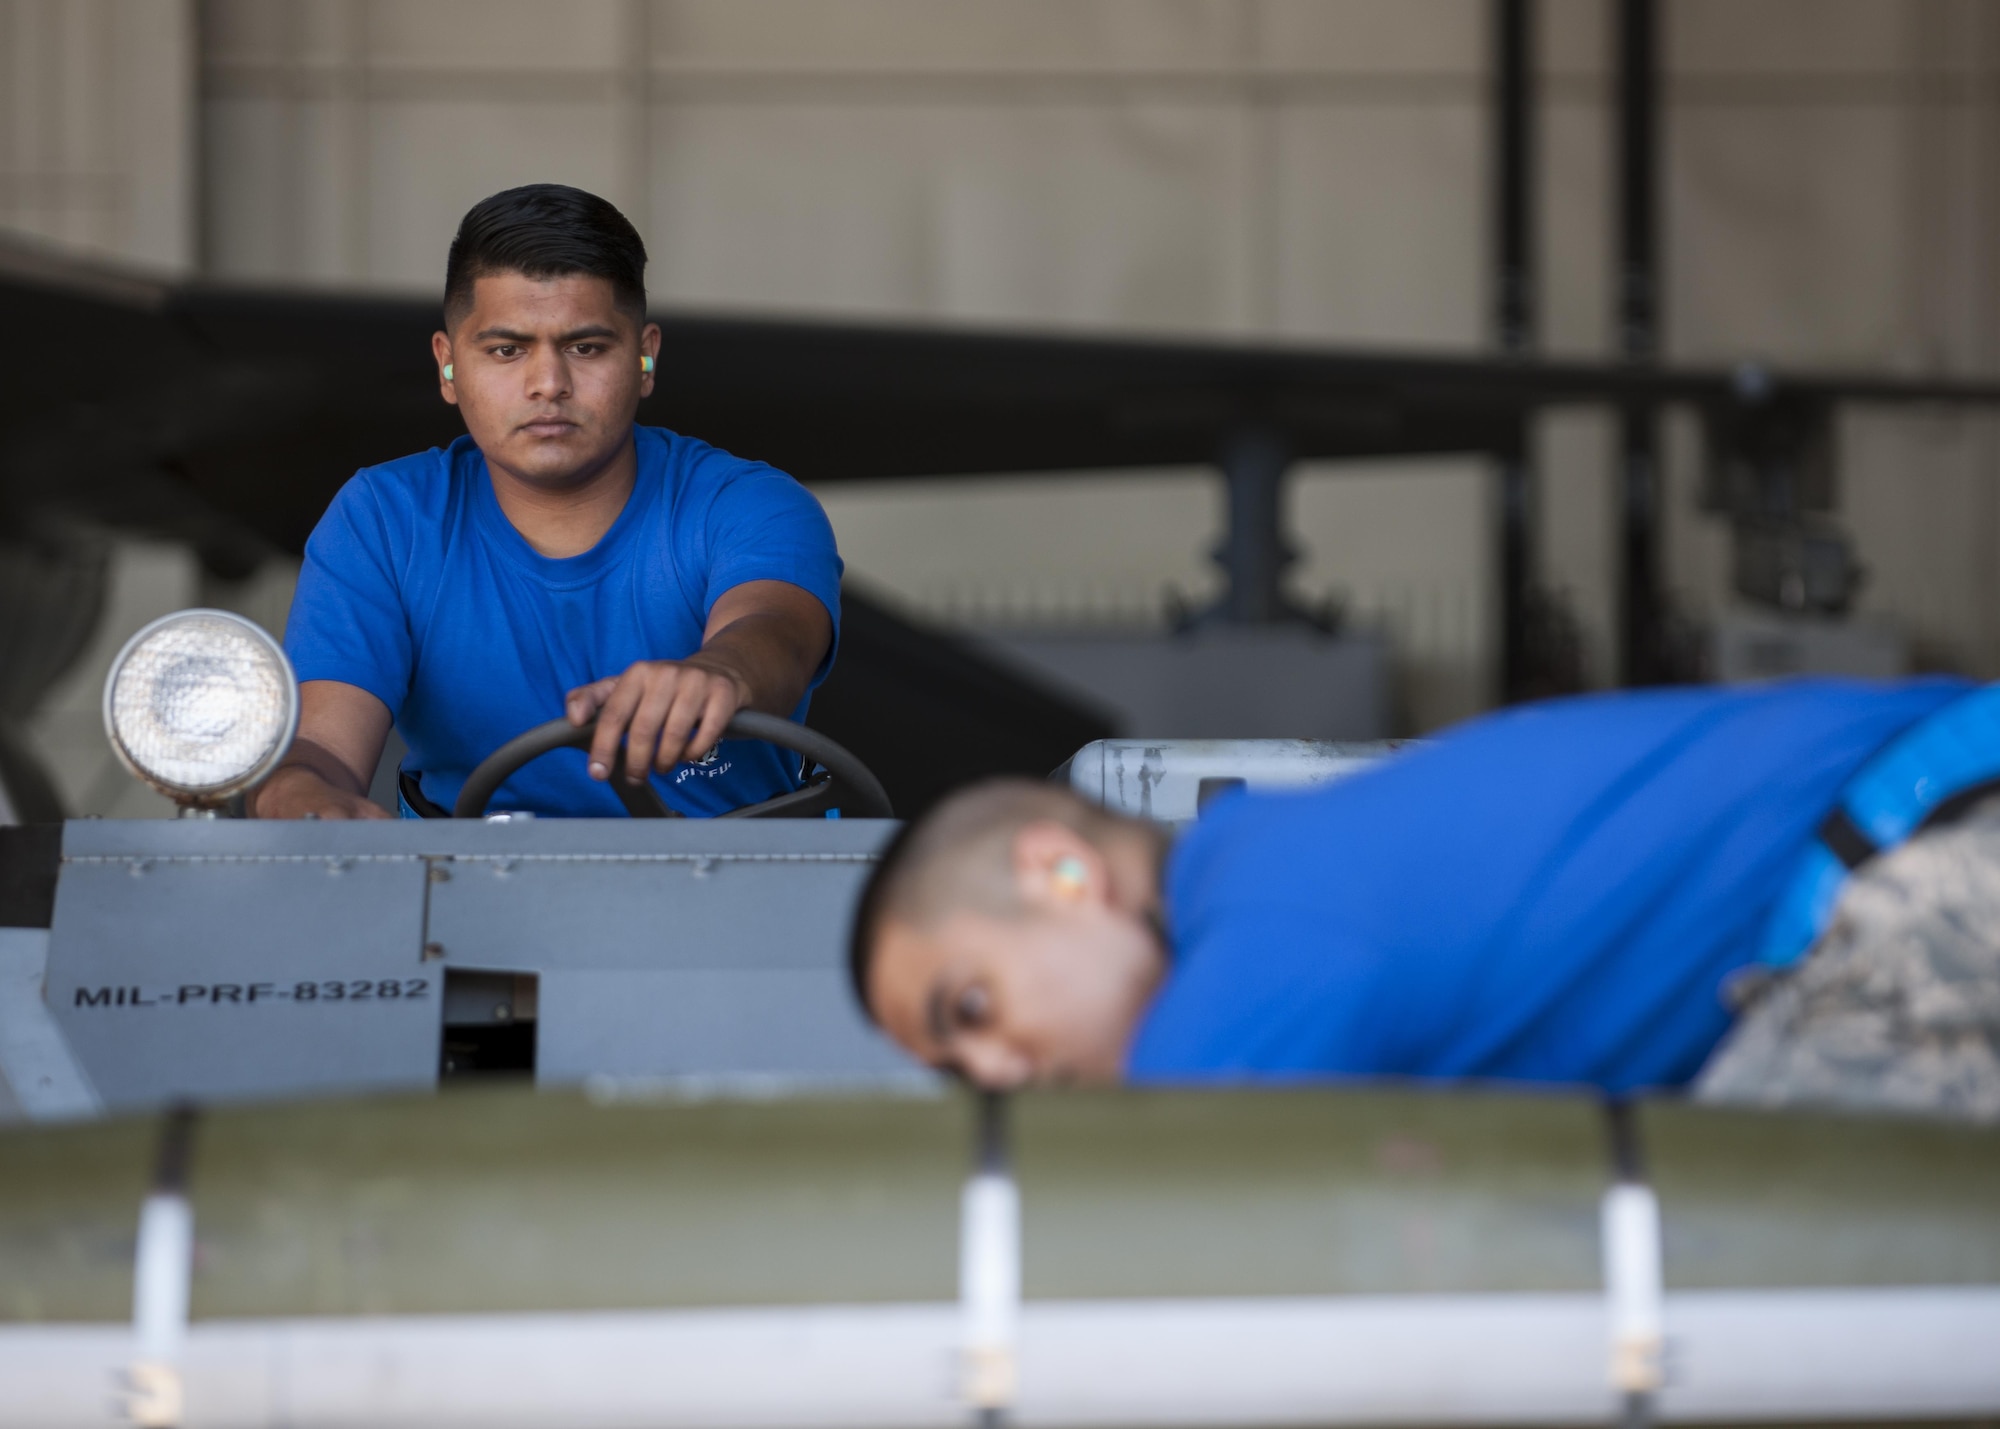 U.S. Air Force Senior Airman Shivanand Bissoon, and Staff Sgt. Princeleo Pecjo, 35th Air Munitions Squadron weapons load crew members, participate in a weapons load competition at Kunsan Air Base, Republic of Korea, Oct. 20, 2017. Load competitions showcase the skills and abilities of each Aircraft Maintenance Unit and prepare teams to load munitions as expeditiously and safely as possible to support Pacific Command priorities on the Korean Peninsula and within the region. (U.S. Air Force photo by Staff Sgt. Victoria H. Taylor)